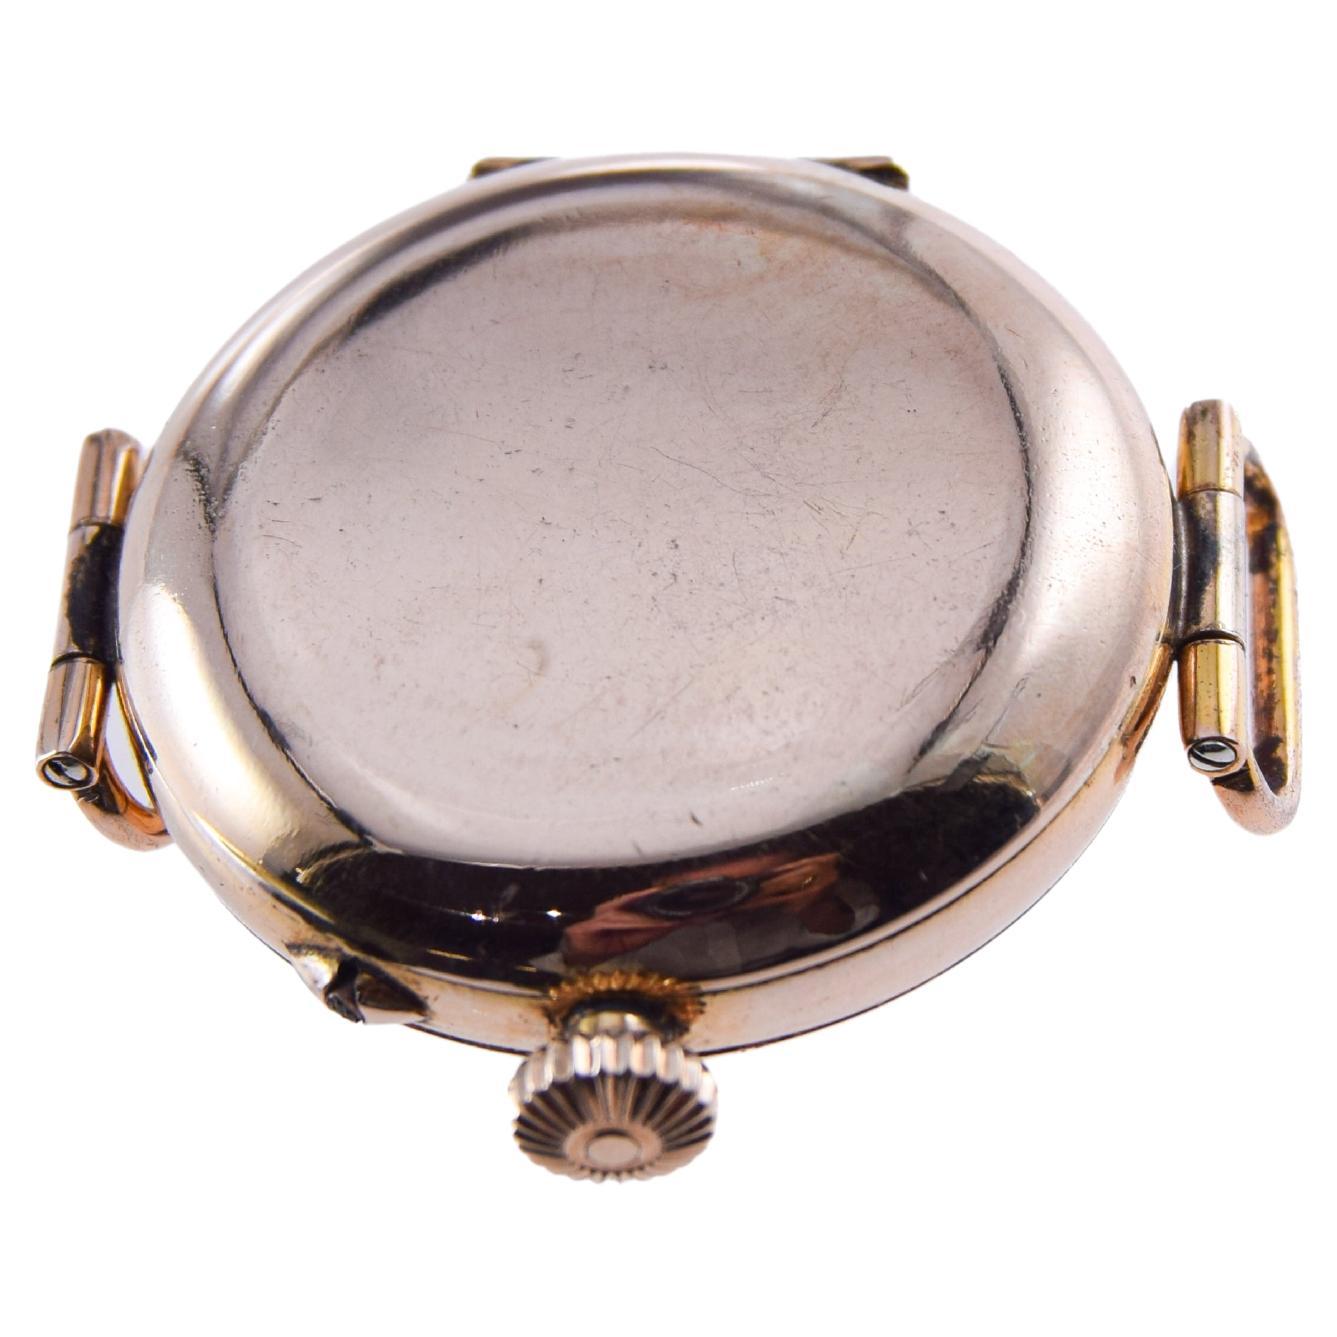 Roskopf Gold-Filled Campaign Style with Original Flawless Enamel Dial Circa 1910 For Sale 6